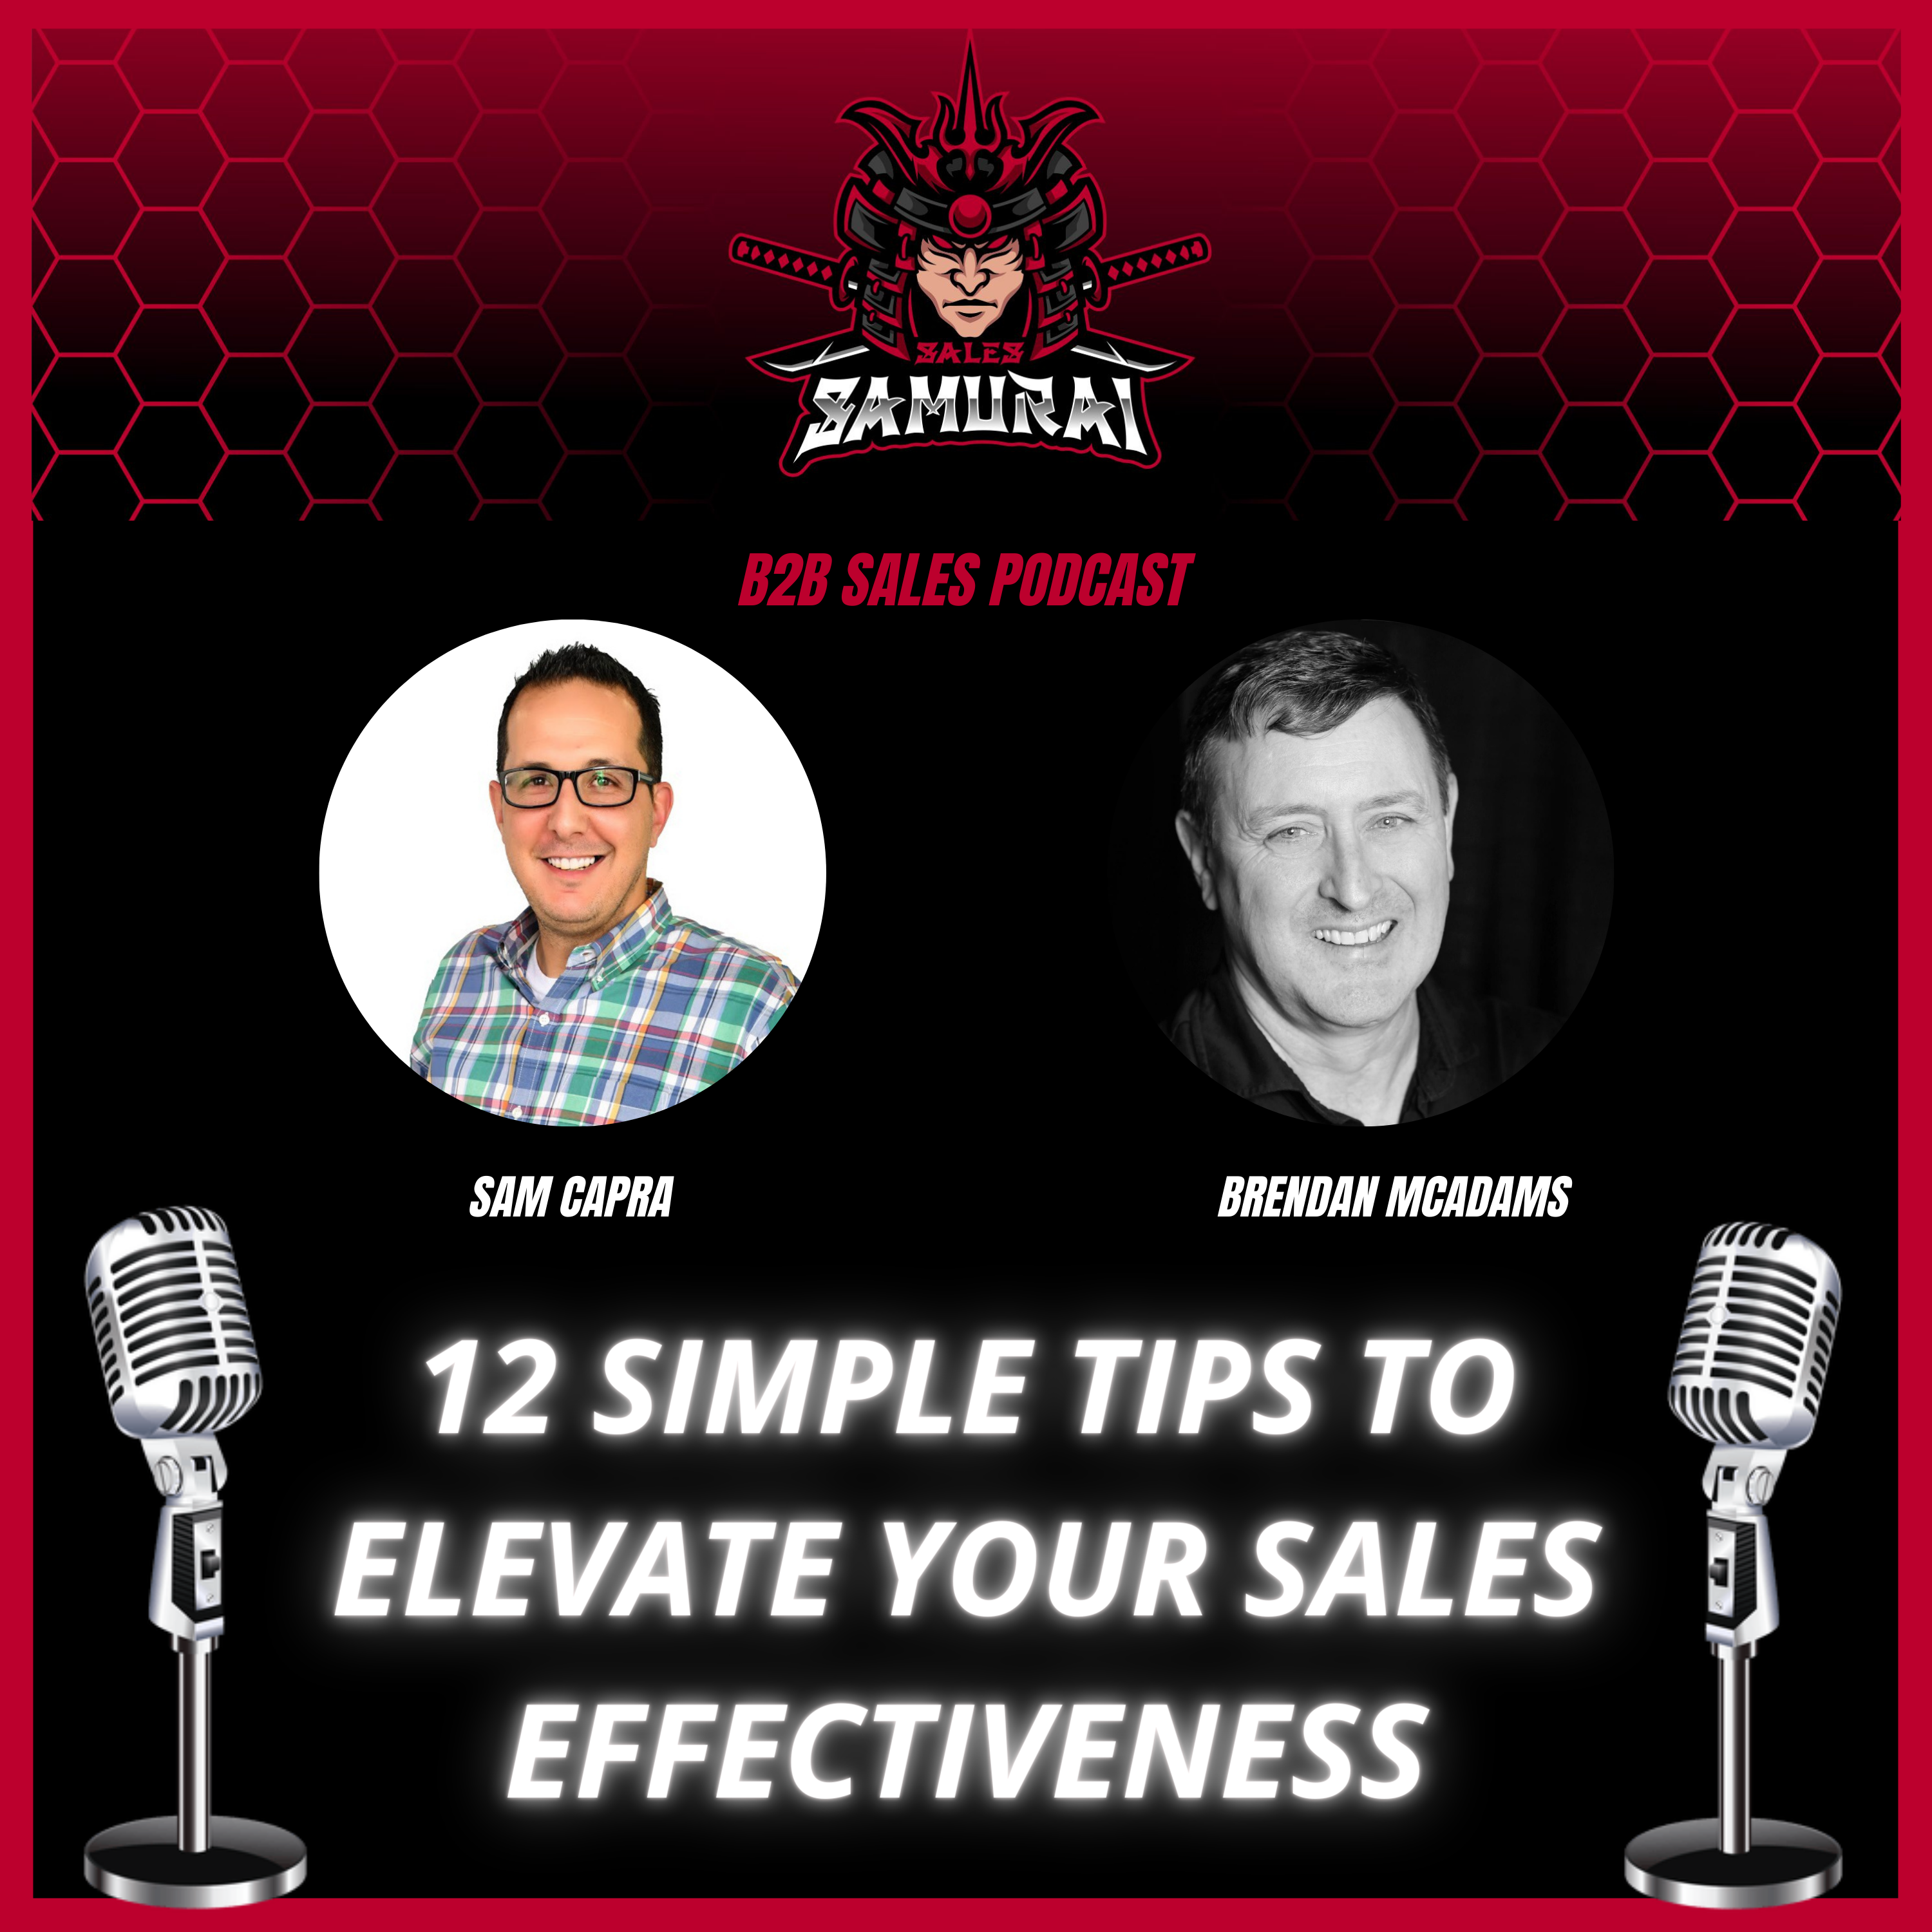 12 Simple Tips to Elevate Your Sales Effectiveness Image